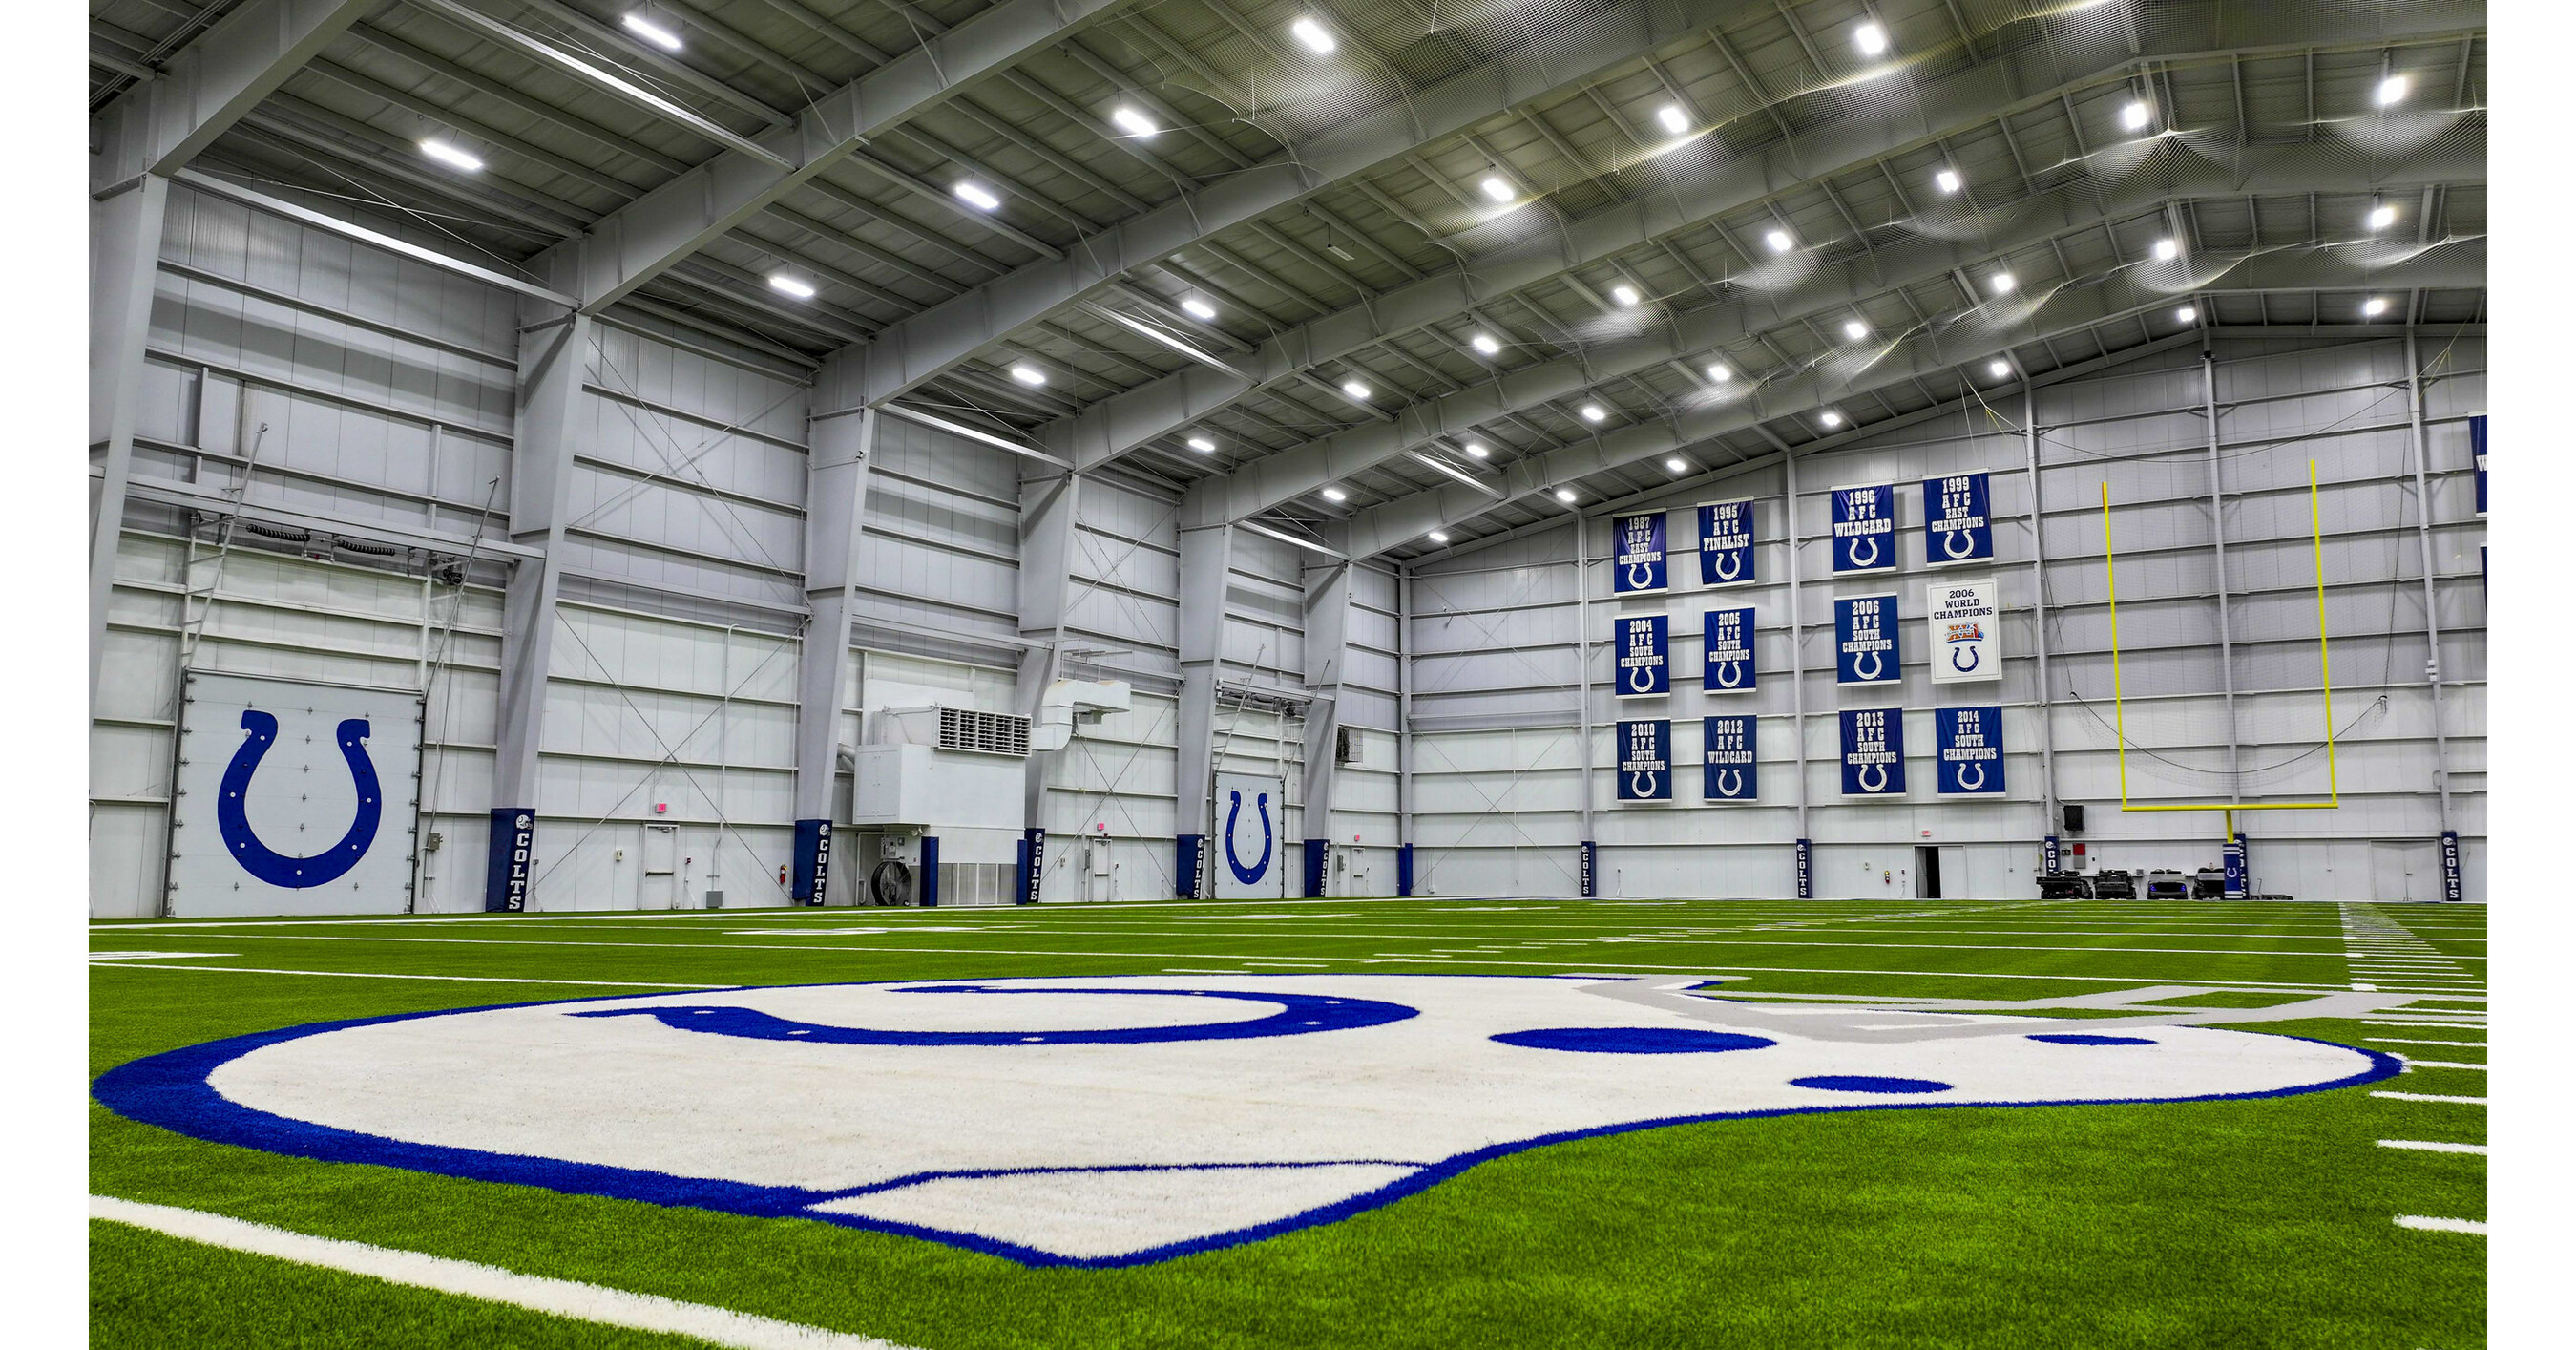 INDIANAPOLIS COLTS CHOOSE HELLAS’ MATRIX HELIX® TURF, GEO COOLFILL®, AND CUSHDRAIN® FOR SAFETY AND PERFORMANCE ENHANCEMENT